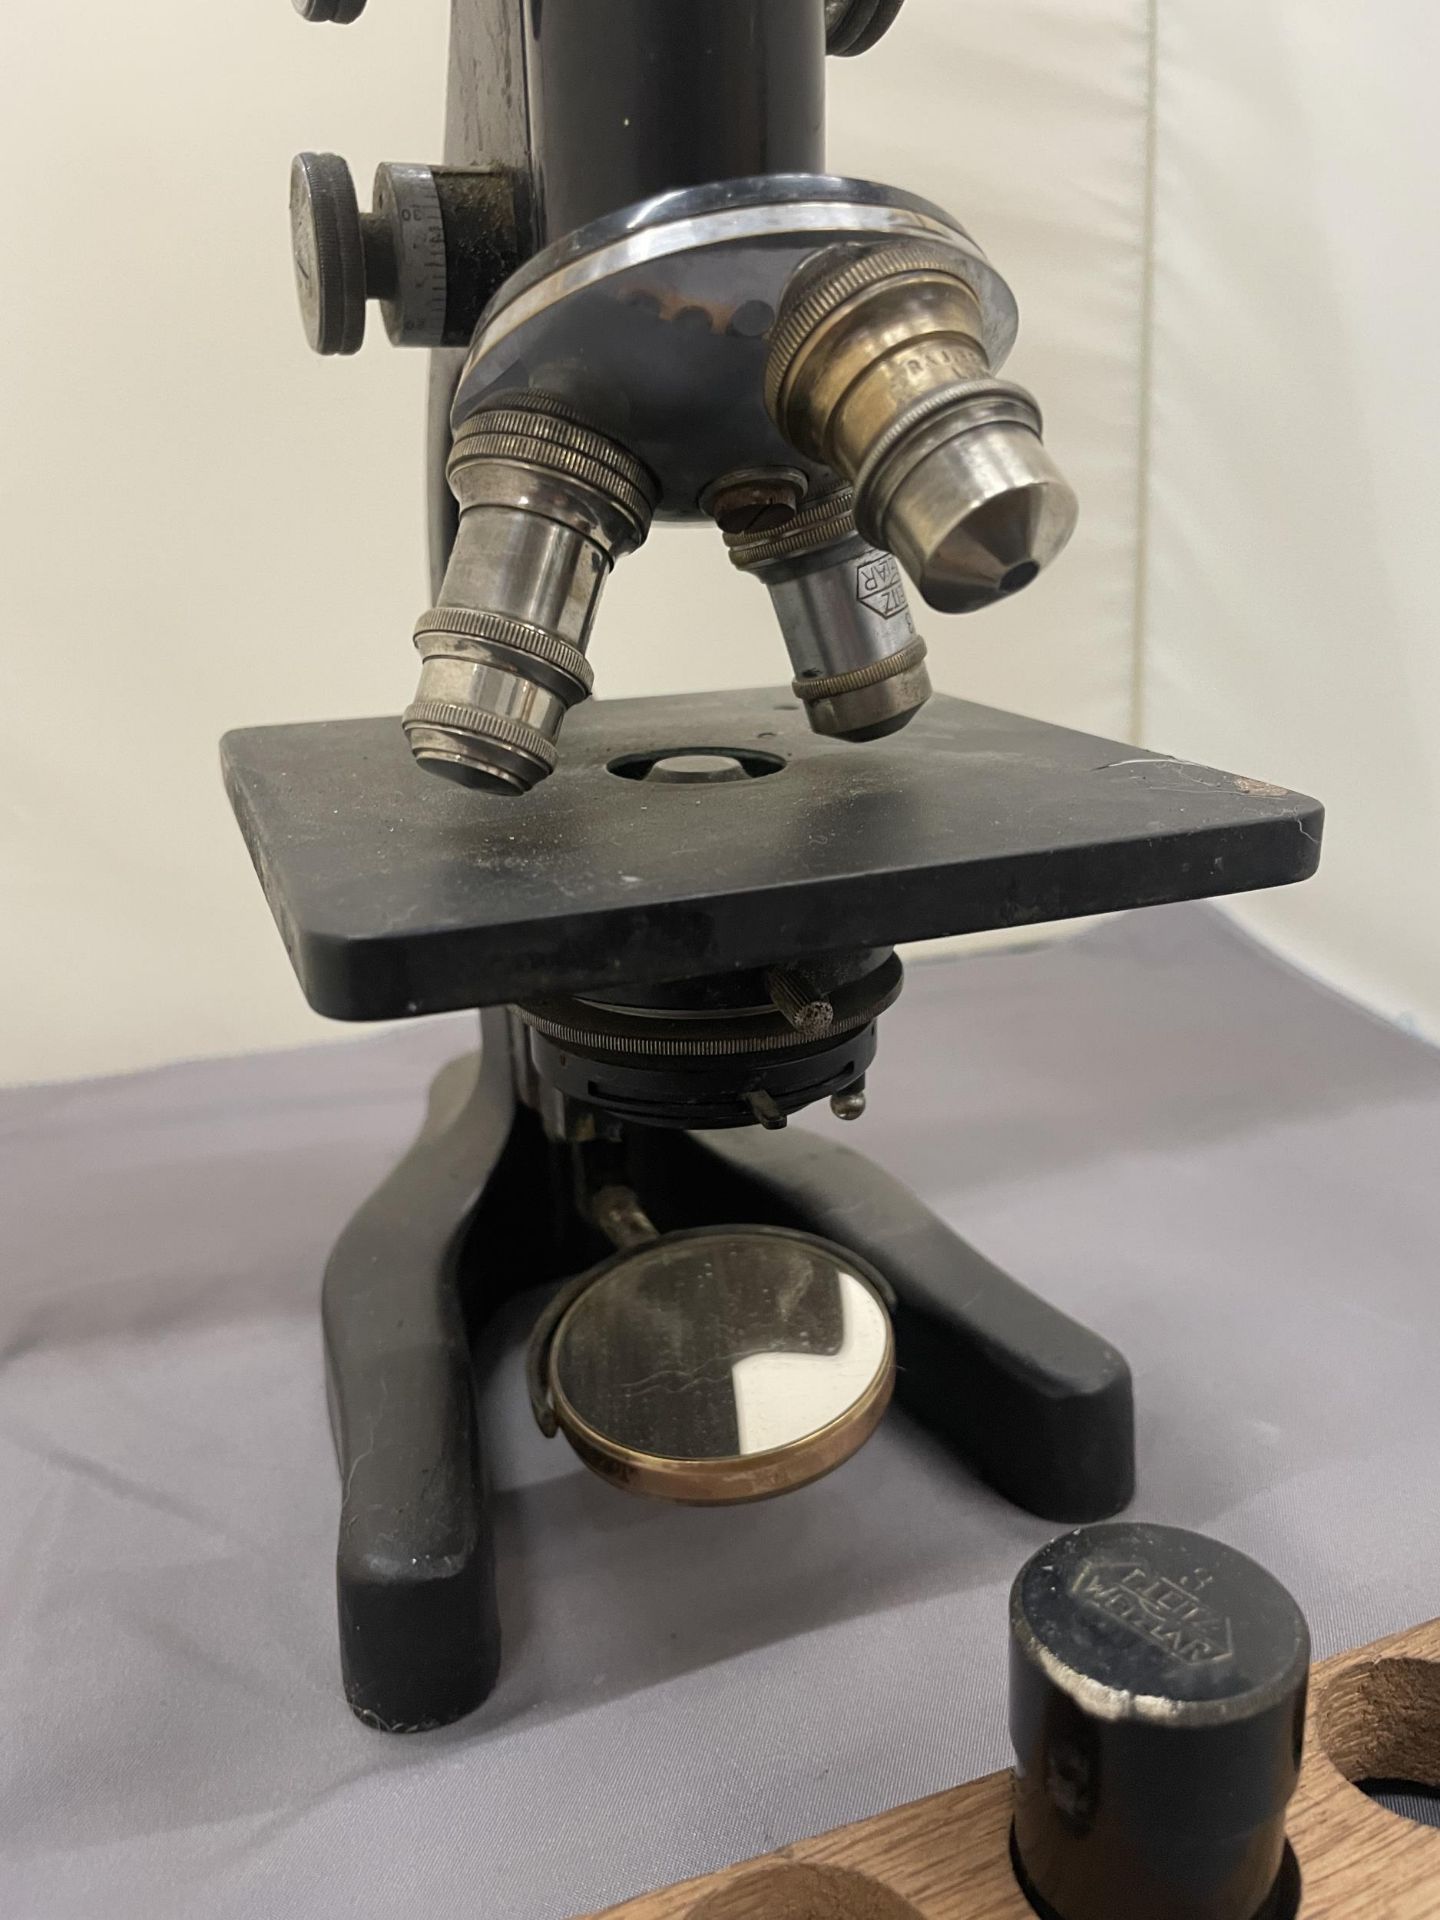 AN ERNST LEITZ WETZLAR MICROSCOPE, NO. 324603, WITH WOOD TRAY AND SPARE LENS - Bild 3 aus 3